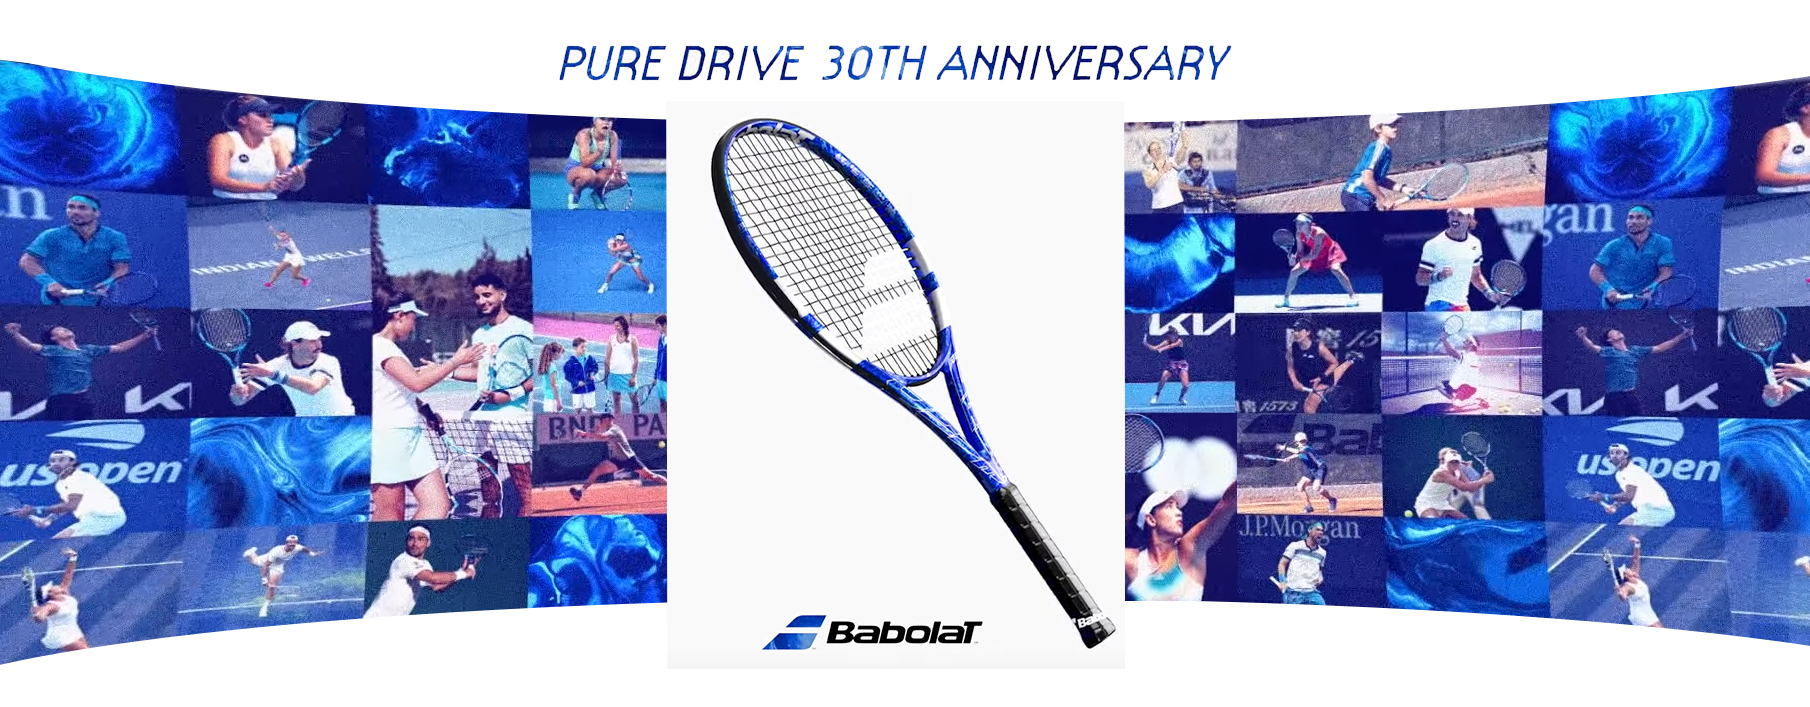 limited edition pure drive 30th anniversary tennis racquet racket